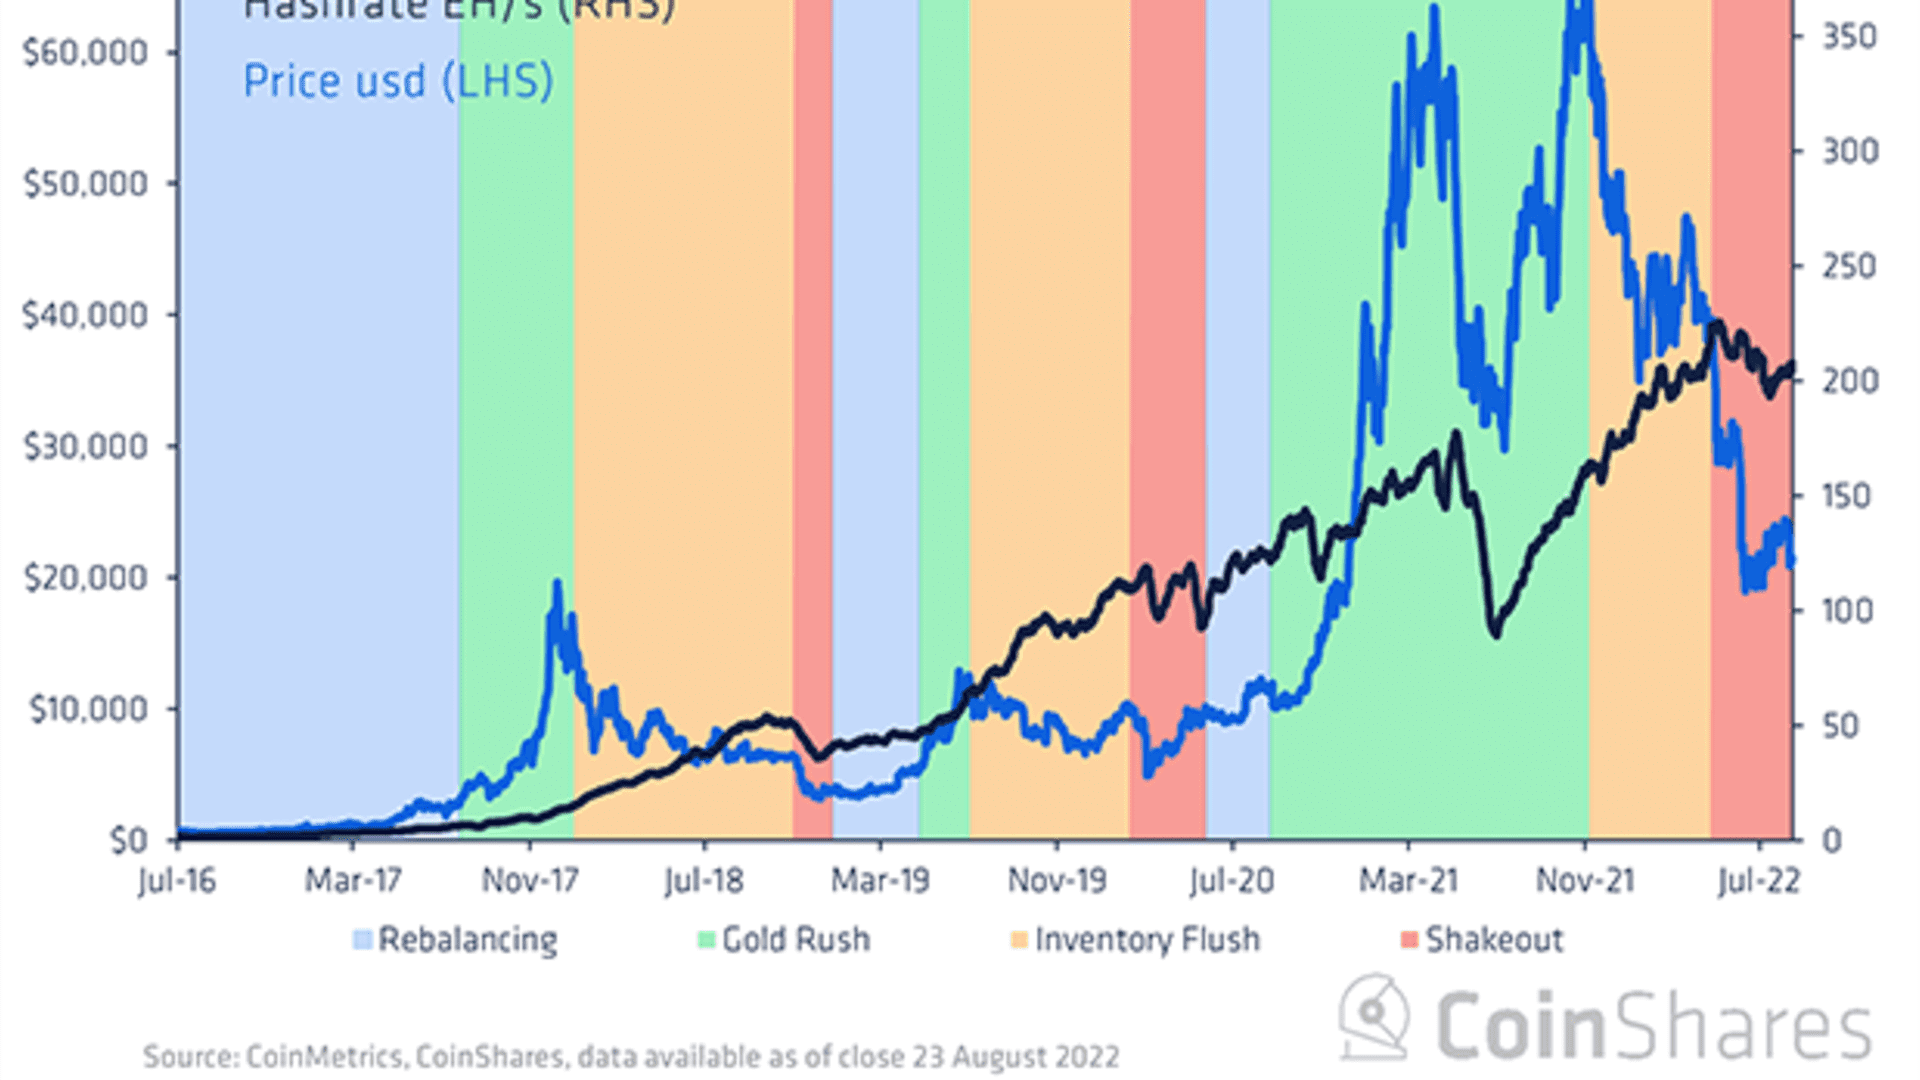 The graph shows the movement of bitcoin hash rate versus bitcoin price at different stages in the cycle. 